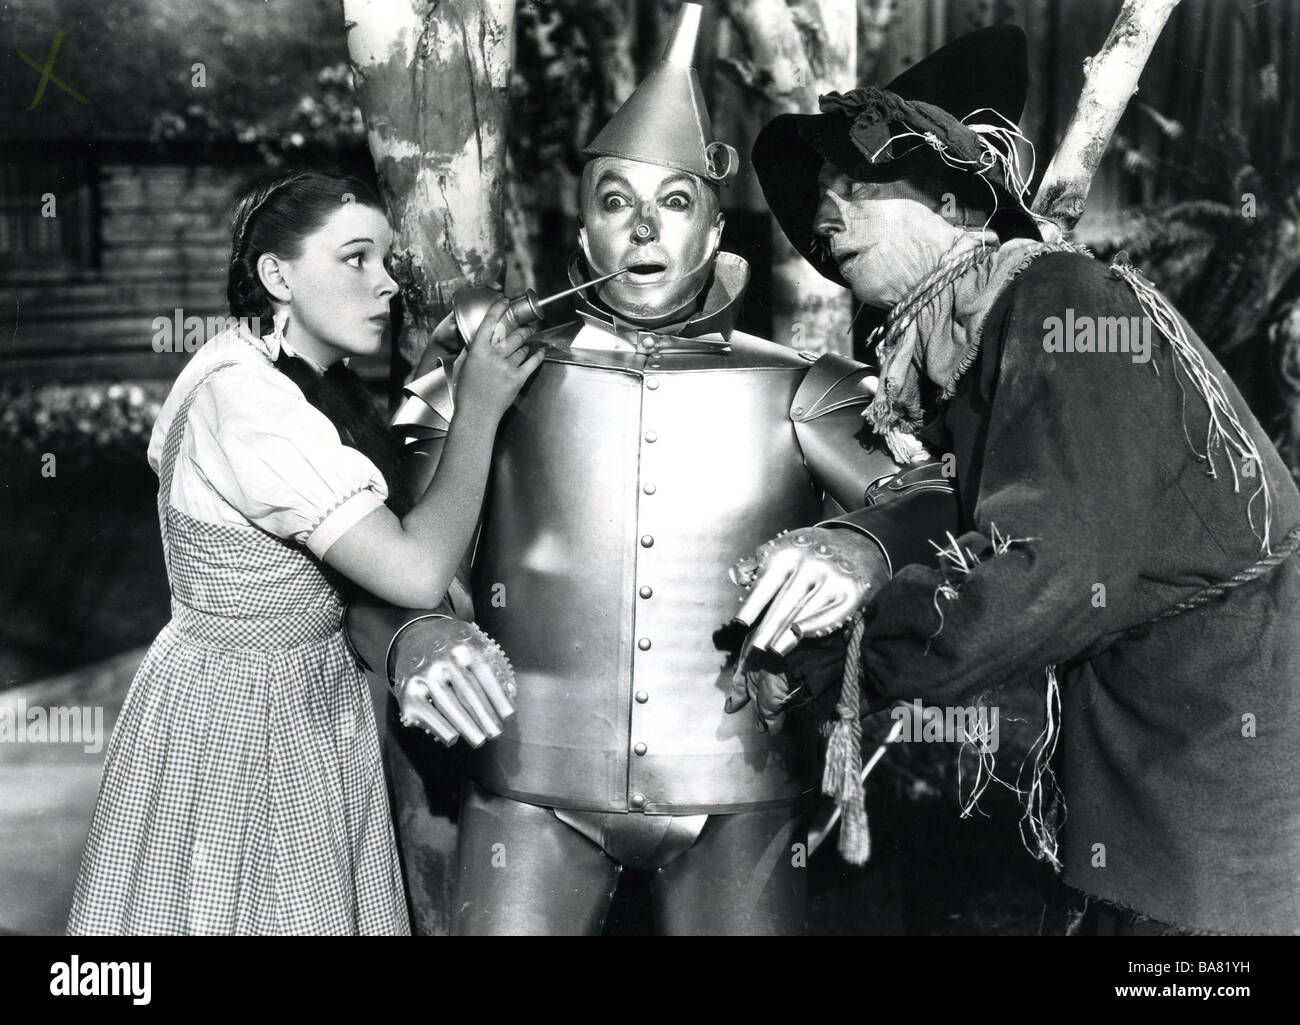 THE WIZARD OF OZ   1939 MGM film with from left Judy Garland, Oliver N Hardy as the Tin Man and Larry Semon as the Scarecrow Stock Photo